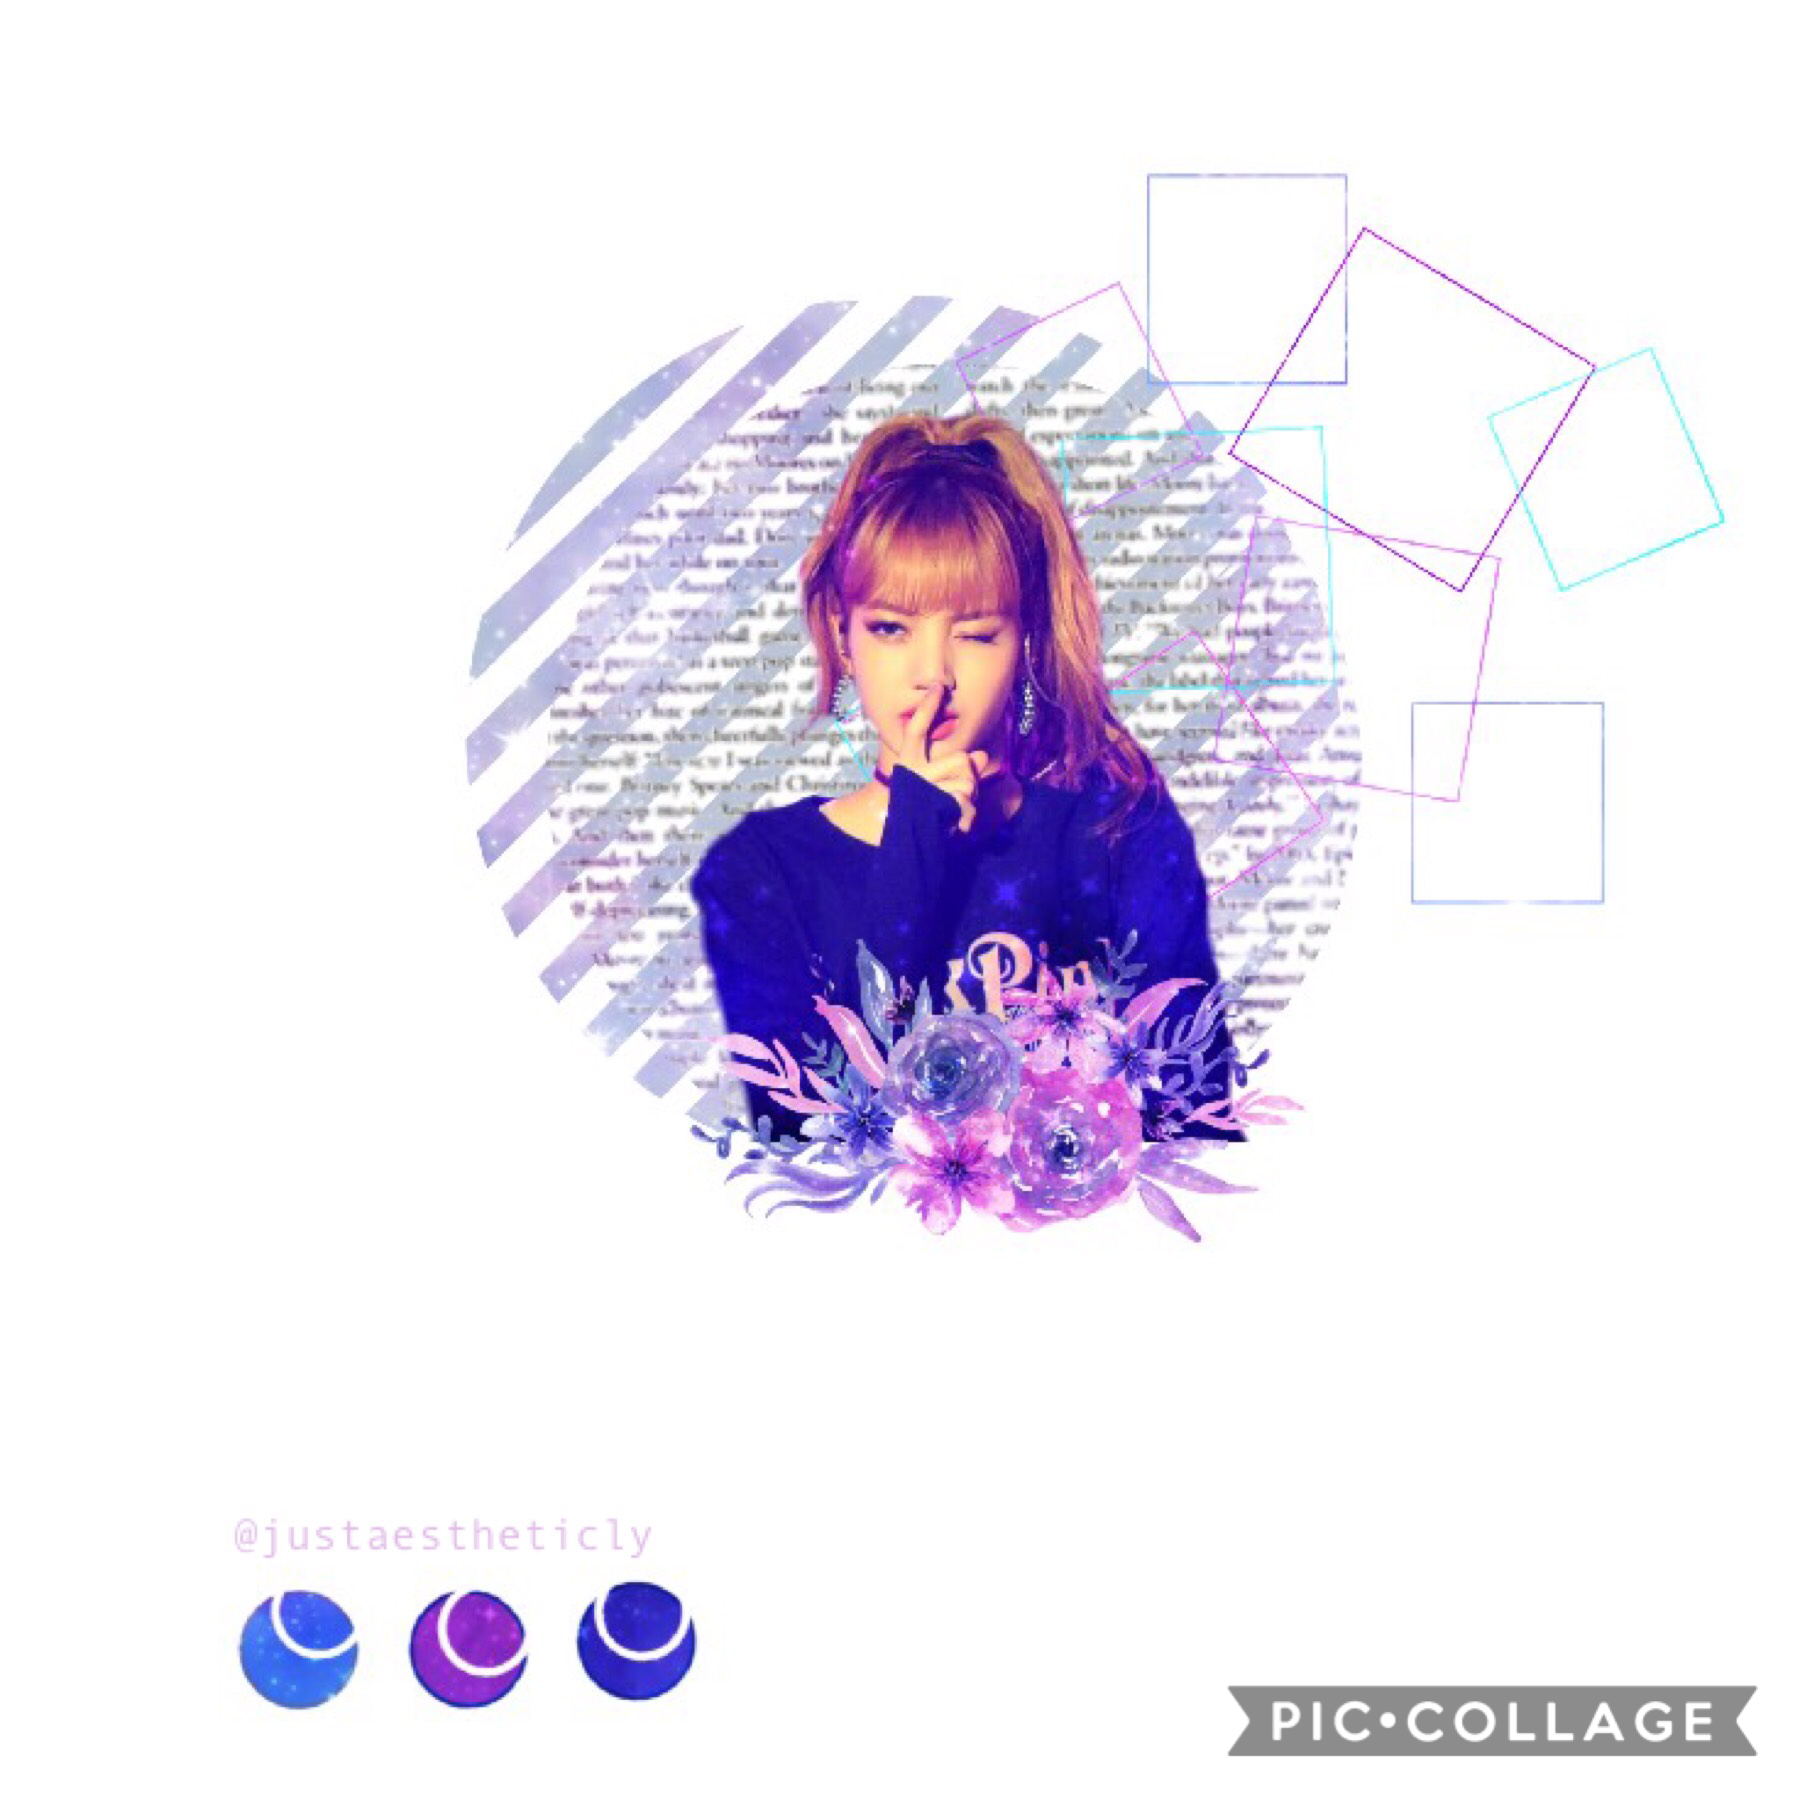 TaP
BLACKPINK Lisa Edit
I actually like this one lol
What bout y’all?
Oof I used some PicsArt help 
DonT tEll 😂